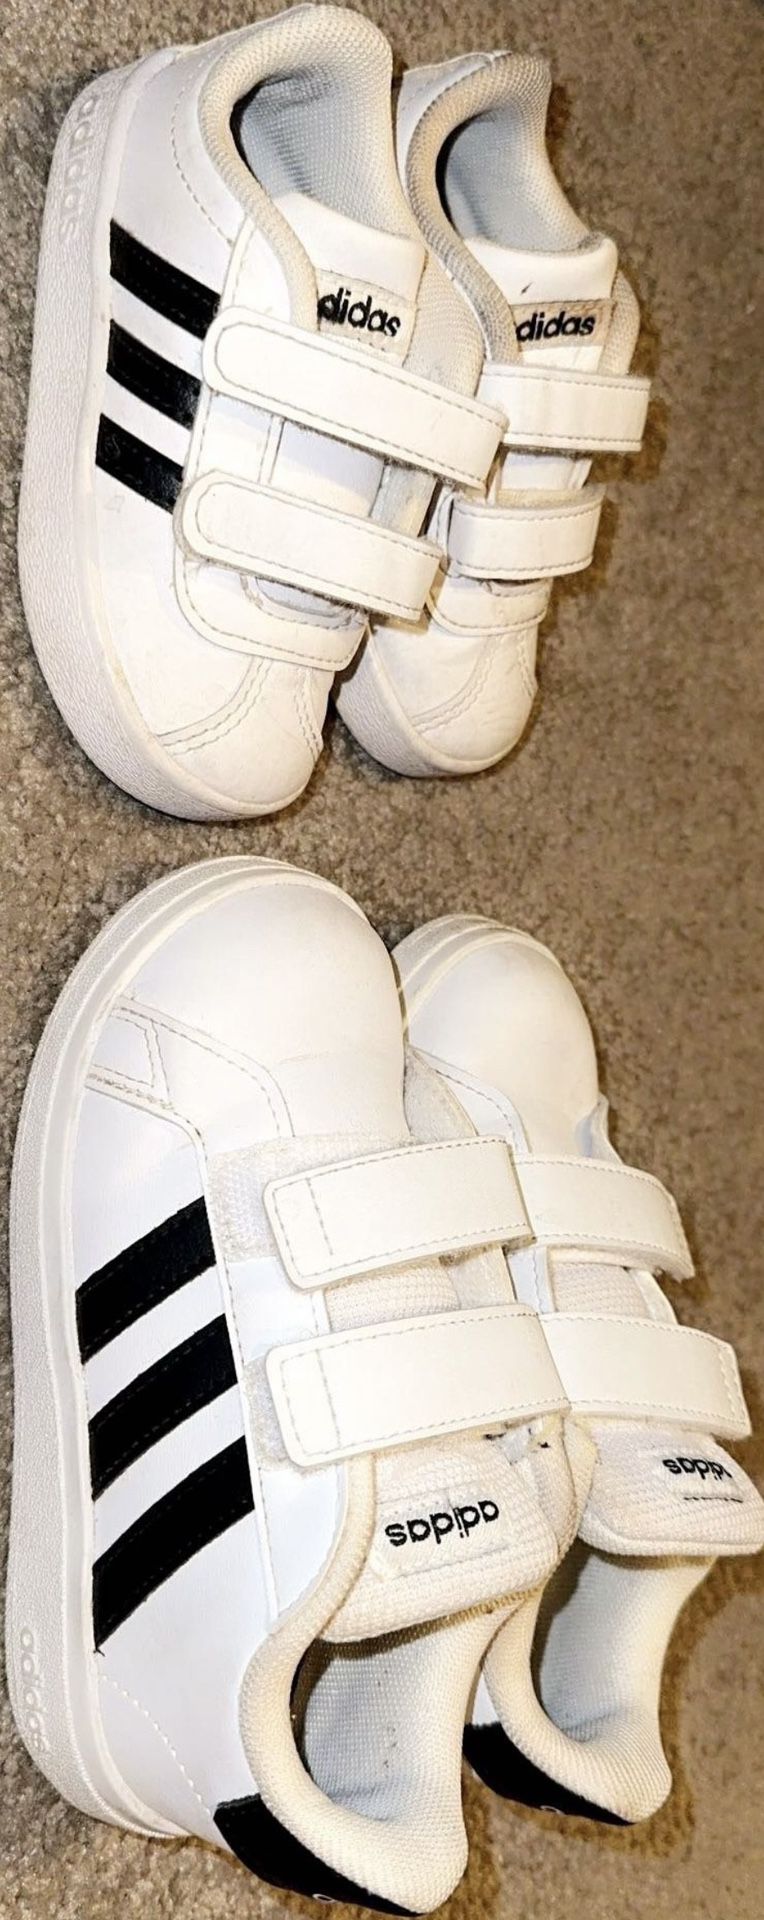 Adidas - Toddler Size 5 & Size 9 - $10 Each